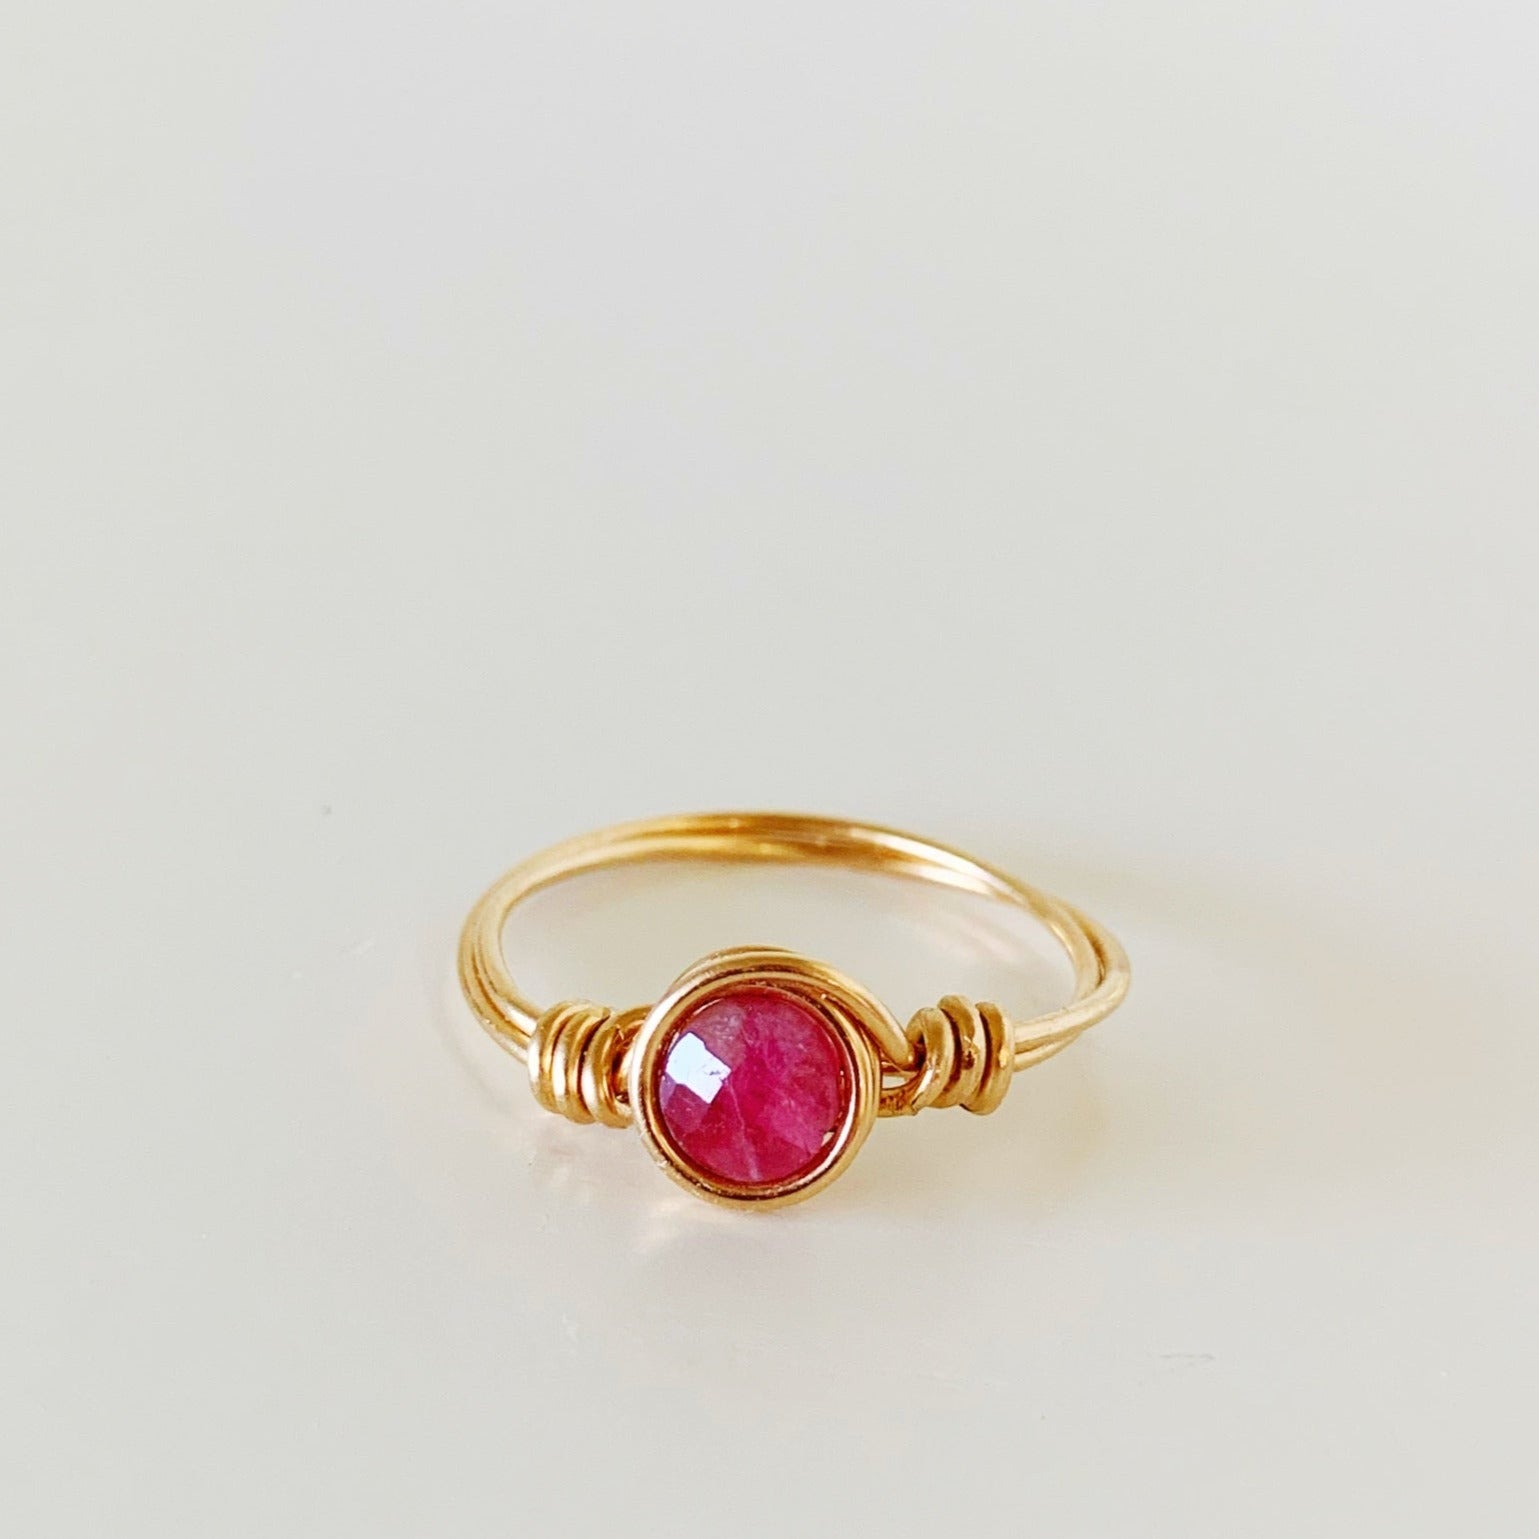 the harwich port ring by mermaids and madeleines is a wire-wrapped ring with 14k gold filled wire and a pink tourmaline faceted coin bead. this ring is photographed facing forward on a white surface